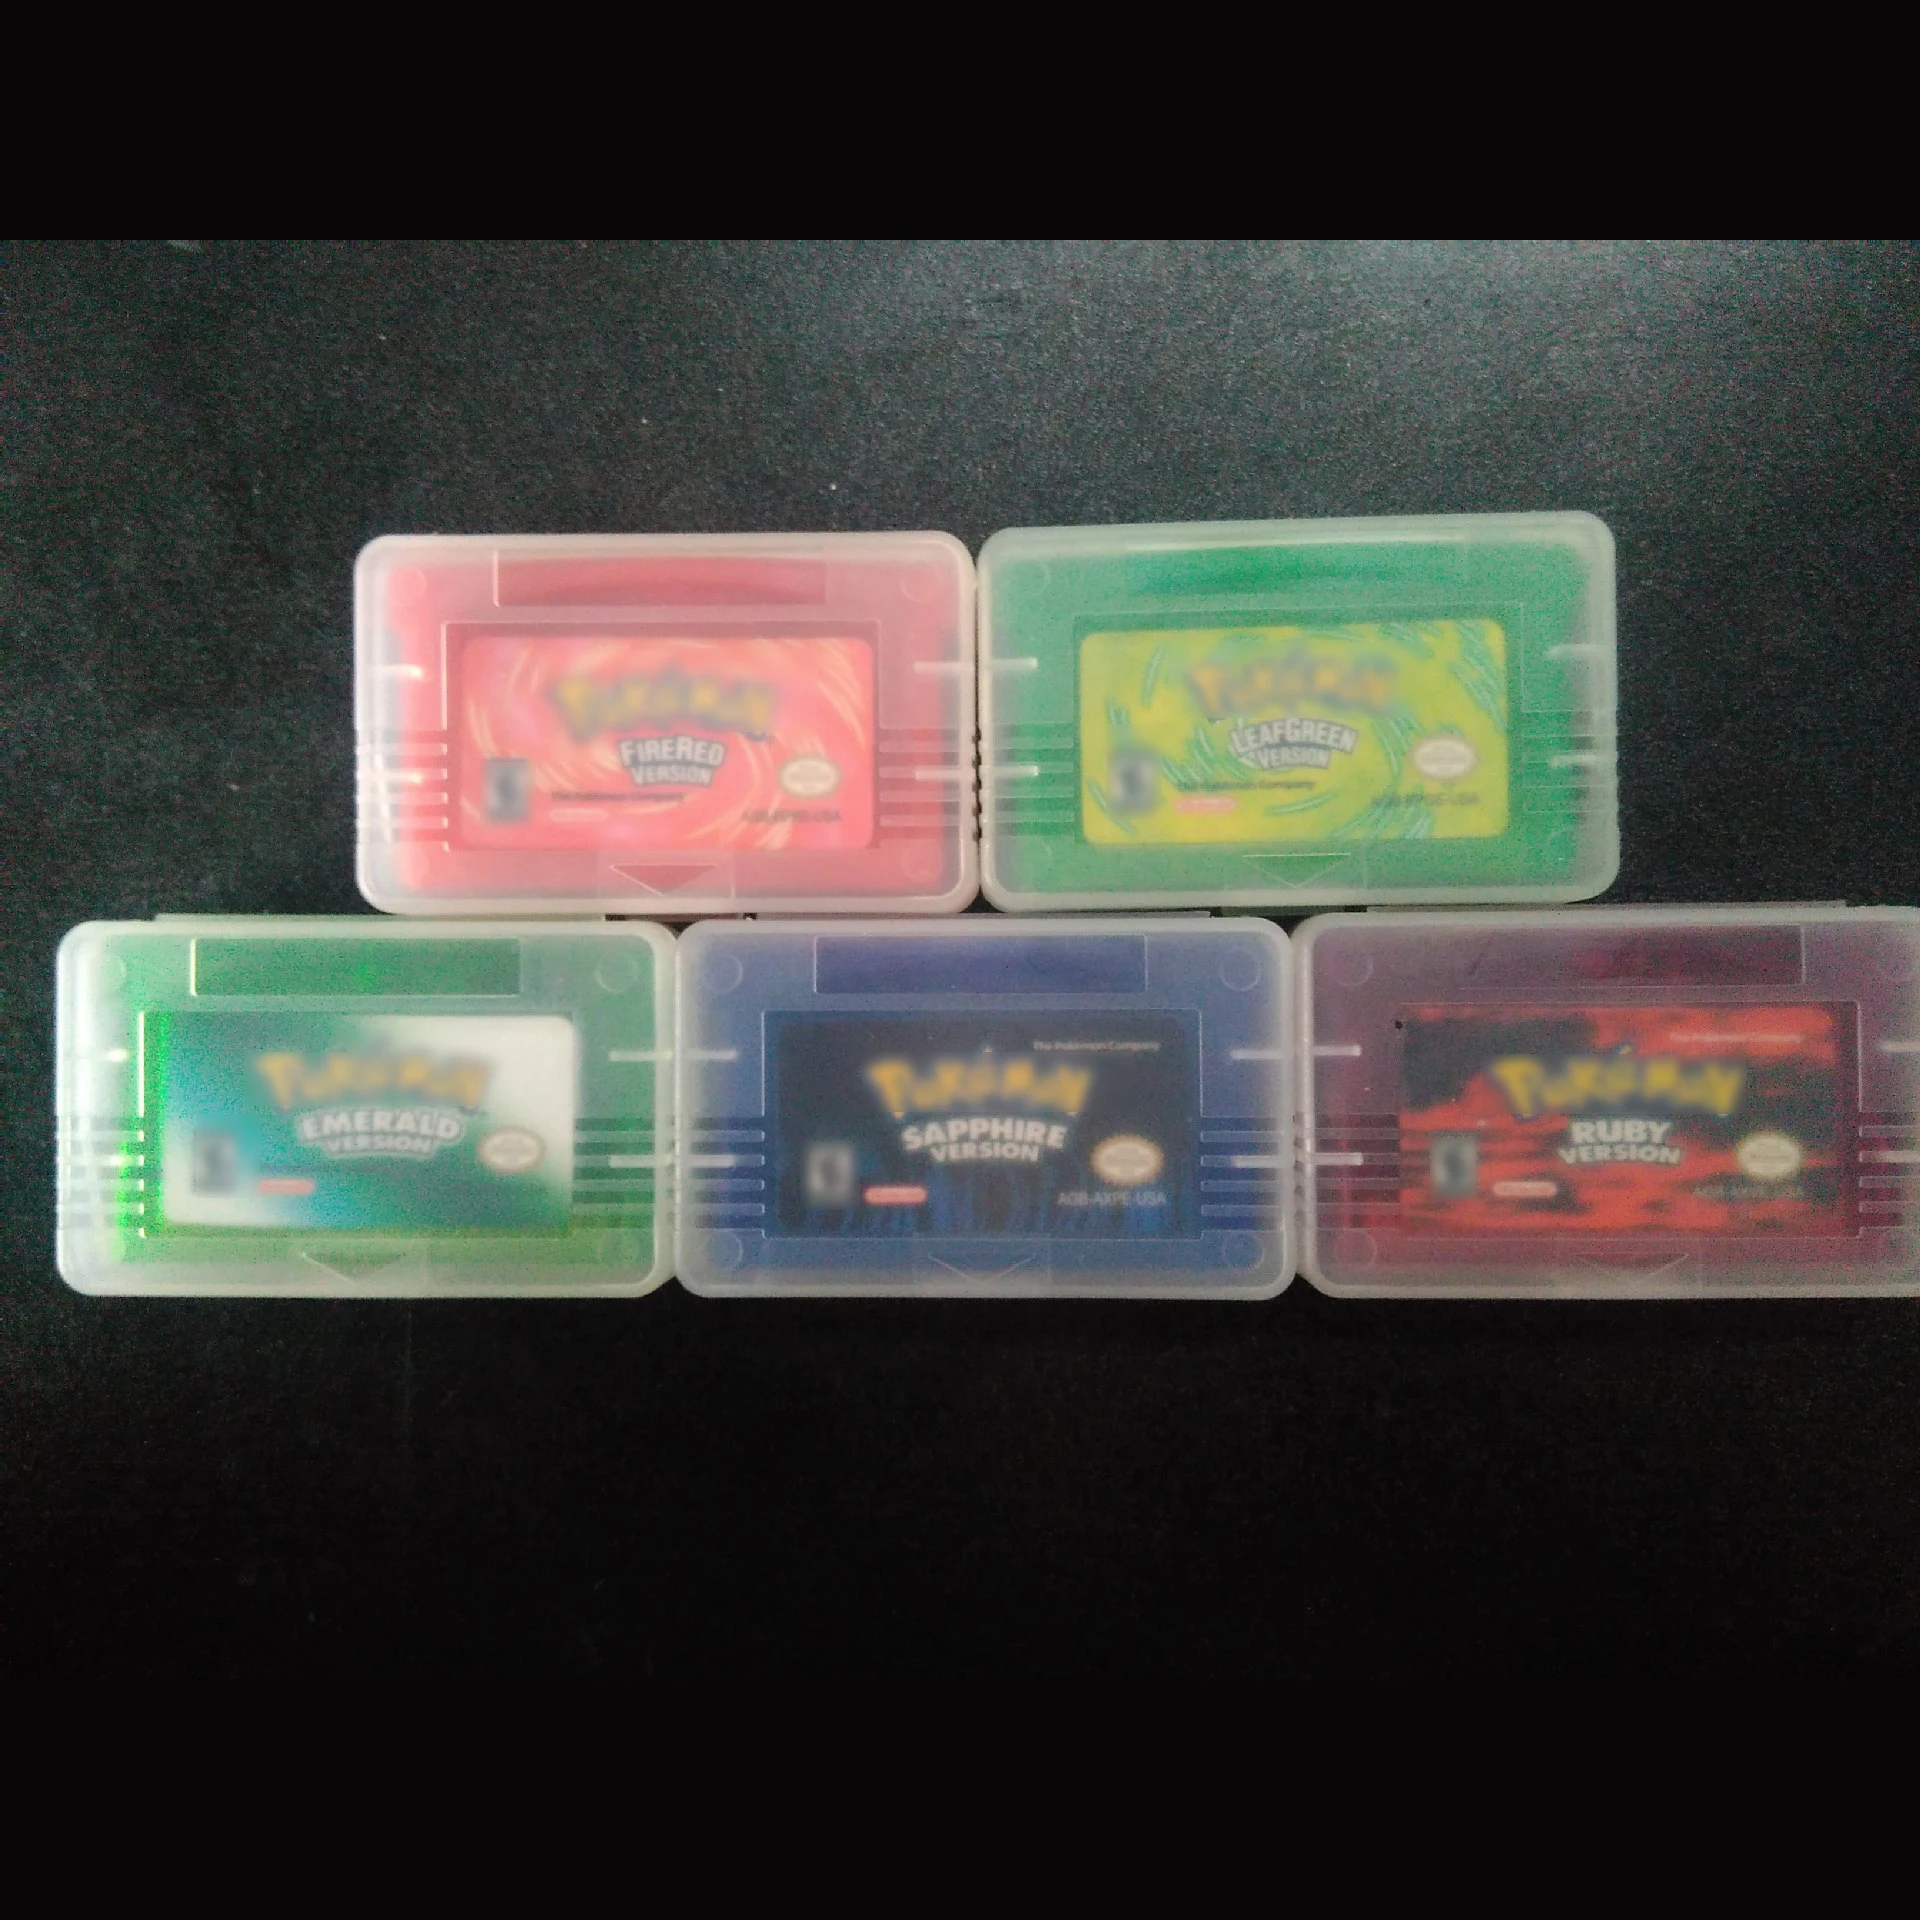 

High Quality Hot selling Cartridge Video Games Card for GBA GBA SP GBM DS Lite Emerald Sapphire Ruby Firered Leafgreen